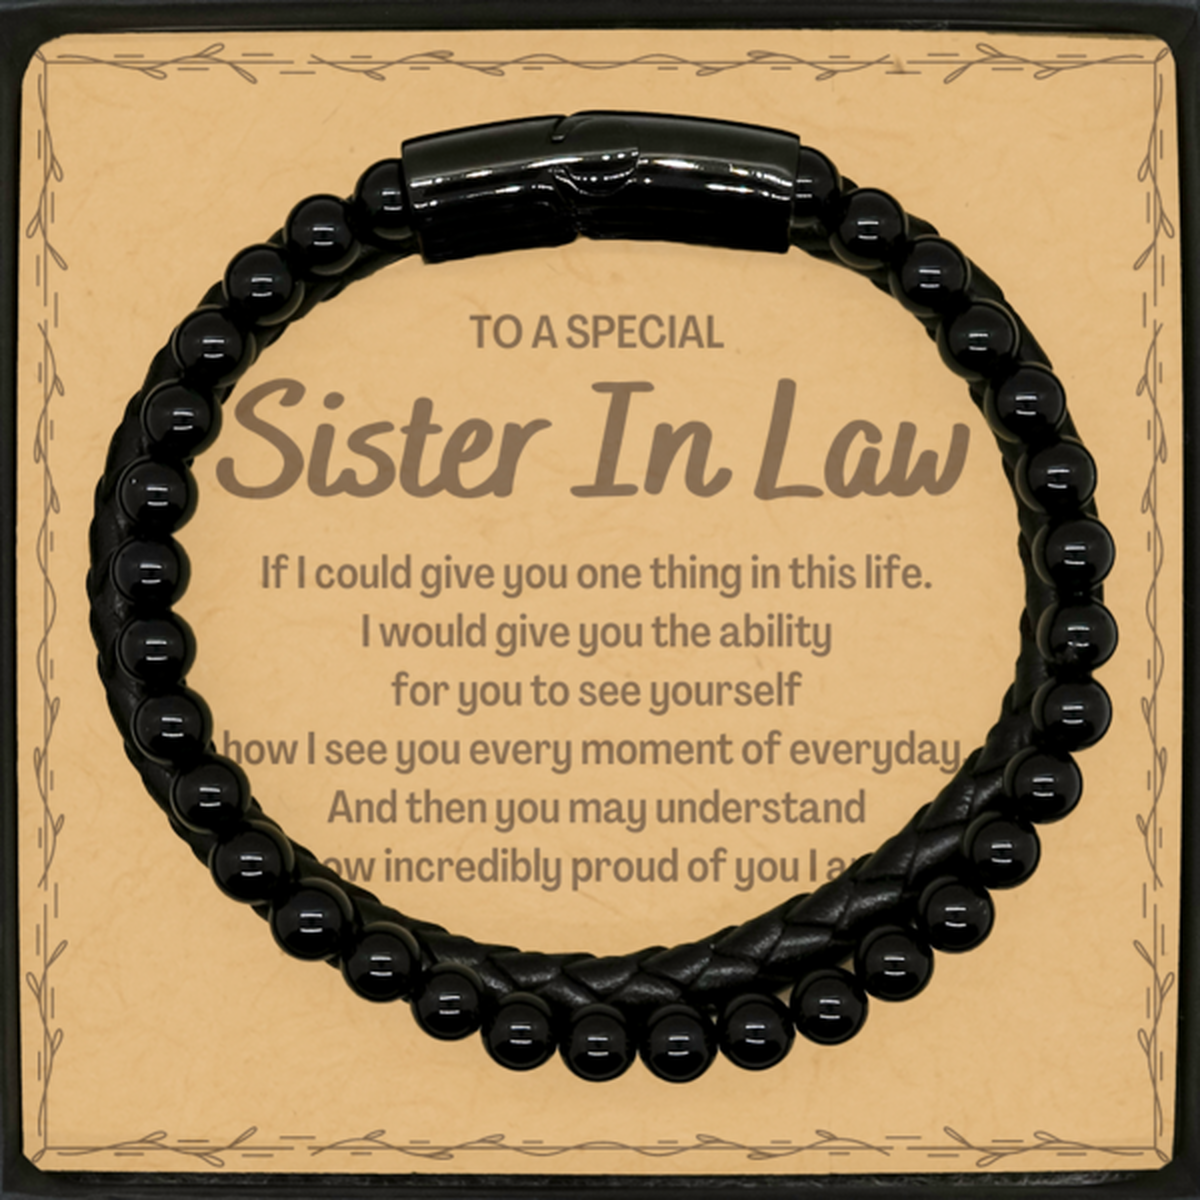 To My Sister In Law Stone Leather Bracelets, Gifts For Sister In Law Message Card, Inspirational Gifts for Christmas Birthday, Epic Gifts for Sister In Law To A Special Sister In Law how incredibly proud of you I am